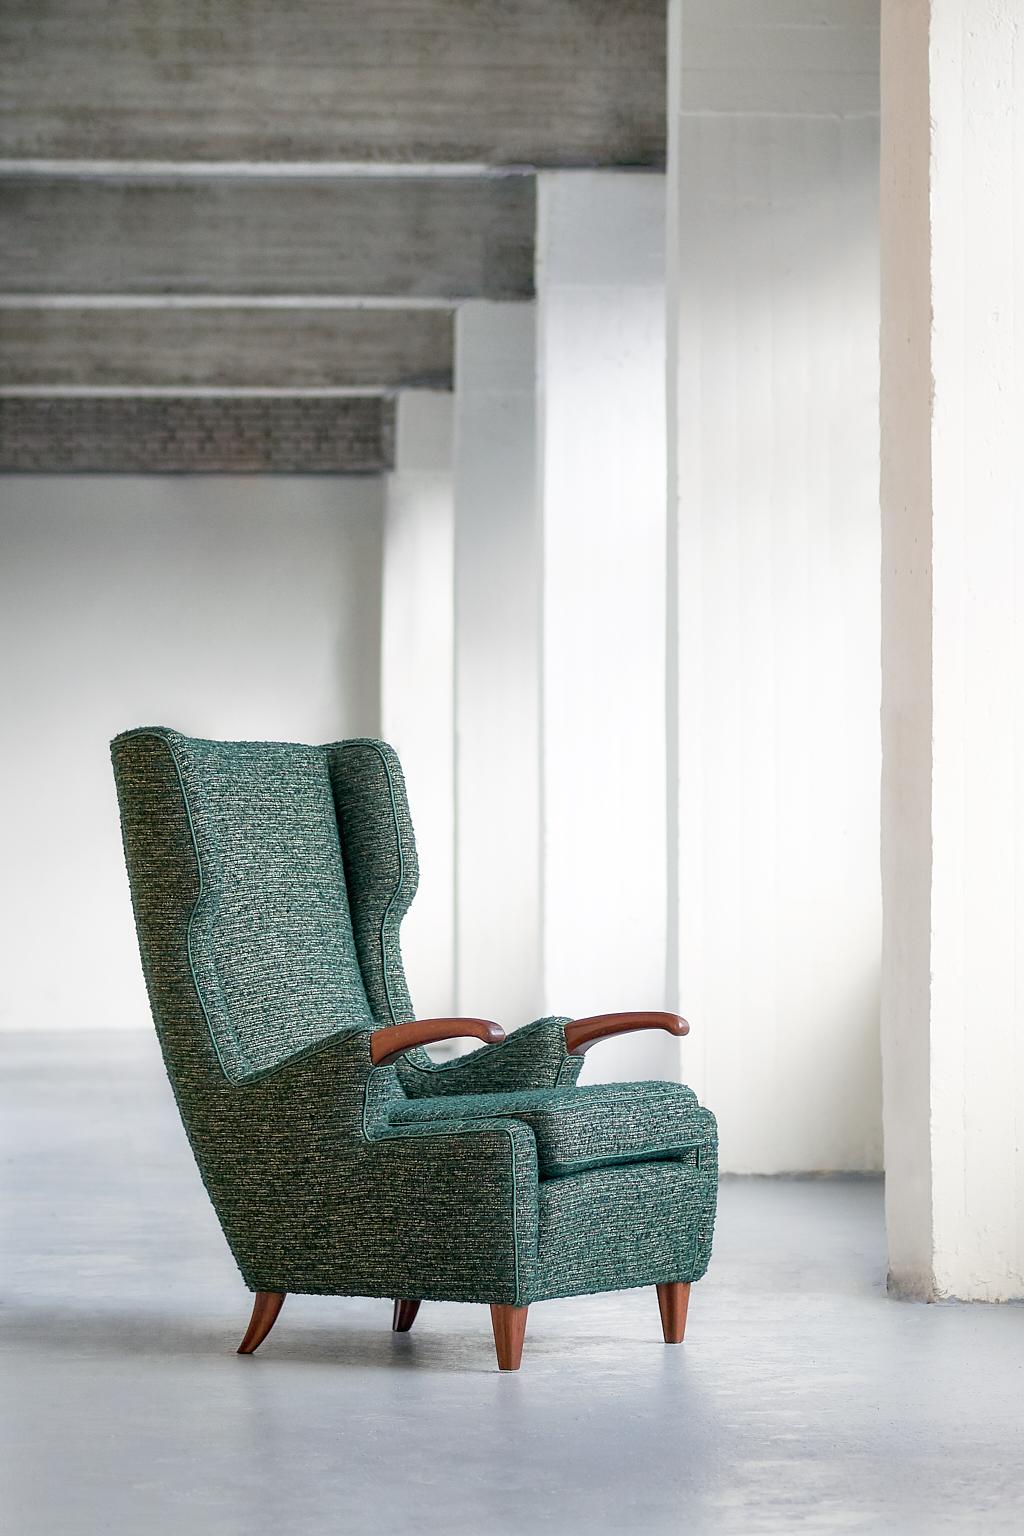 This rare armchair was designed by Pier Luigi Colli and manufactured by his Turin workshop Colli in 1947. The sophisticated design was numbered model 505. The striking curved armrests and legs are in solid walnut. The chair has been fully